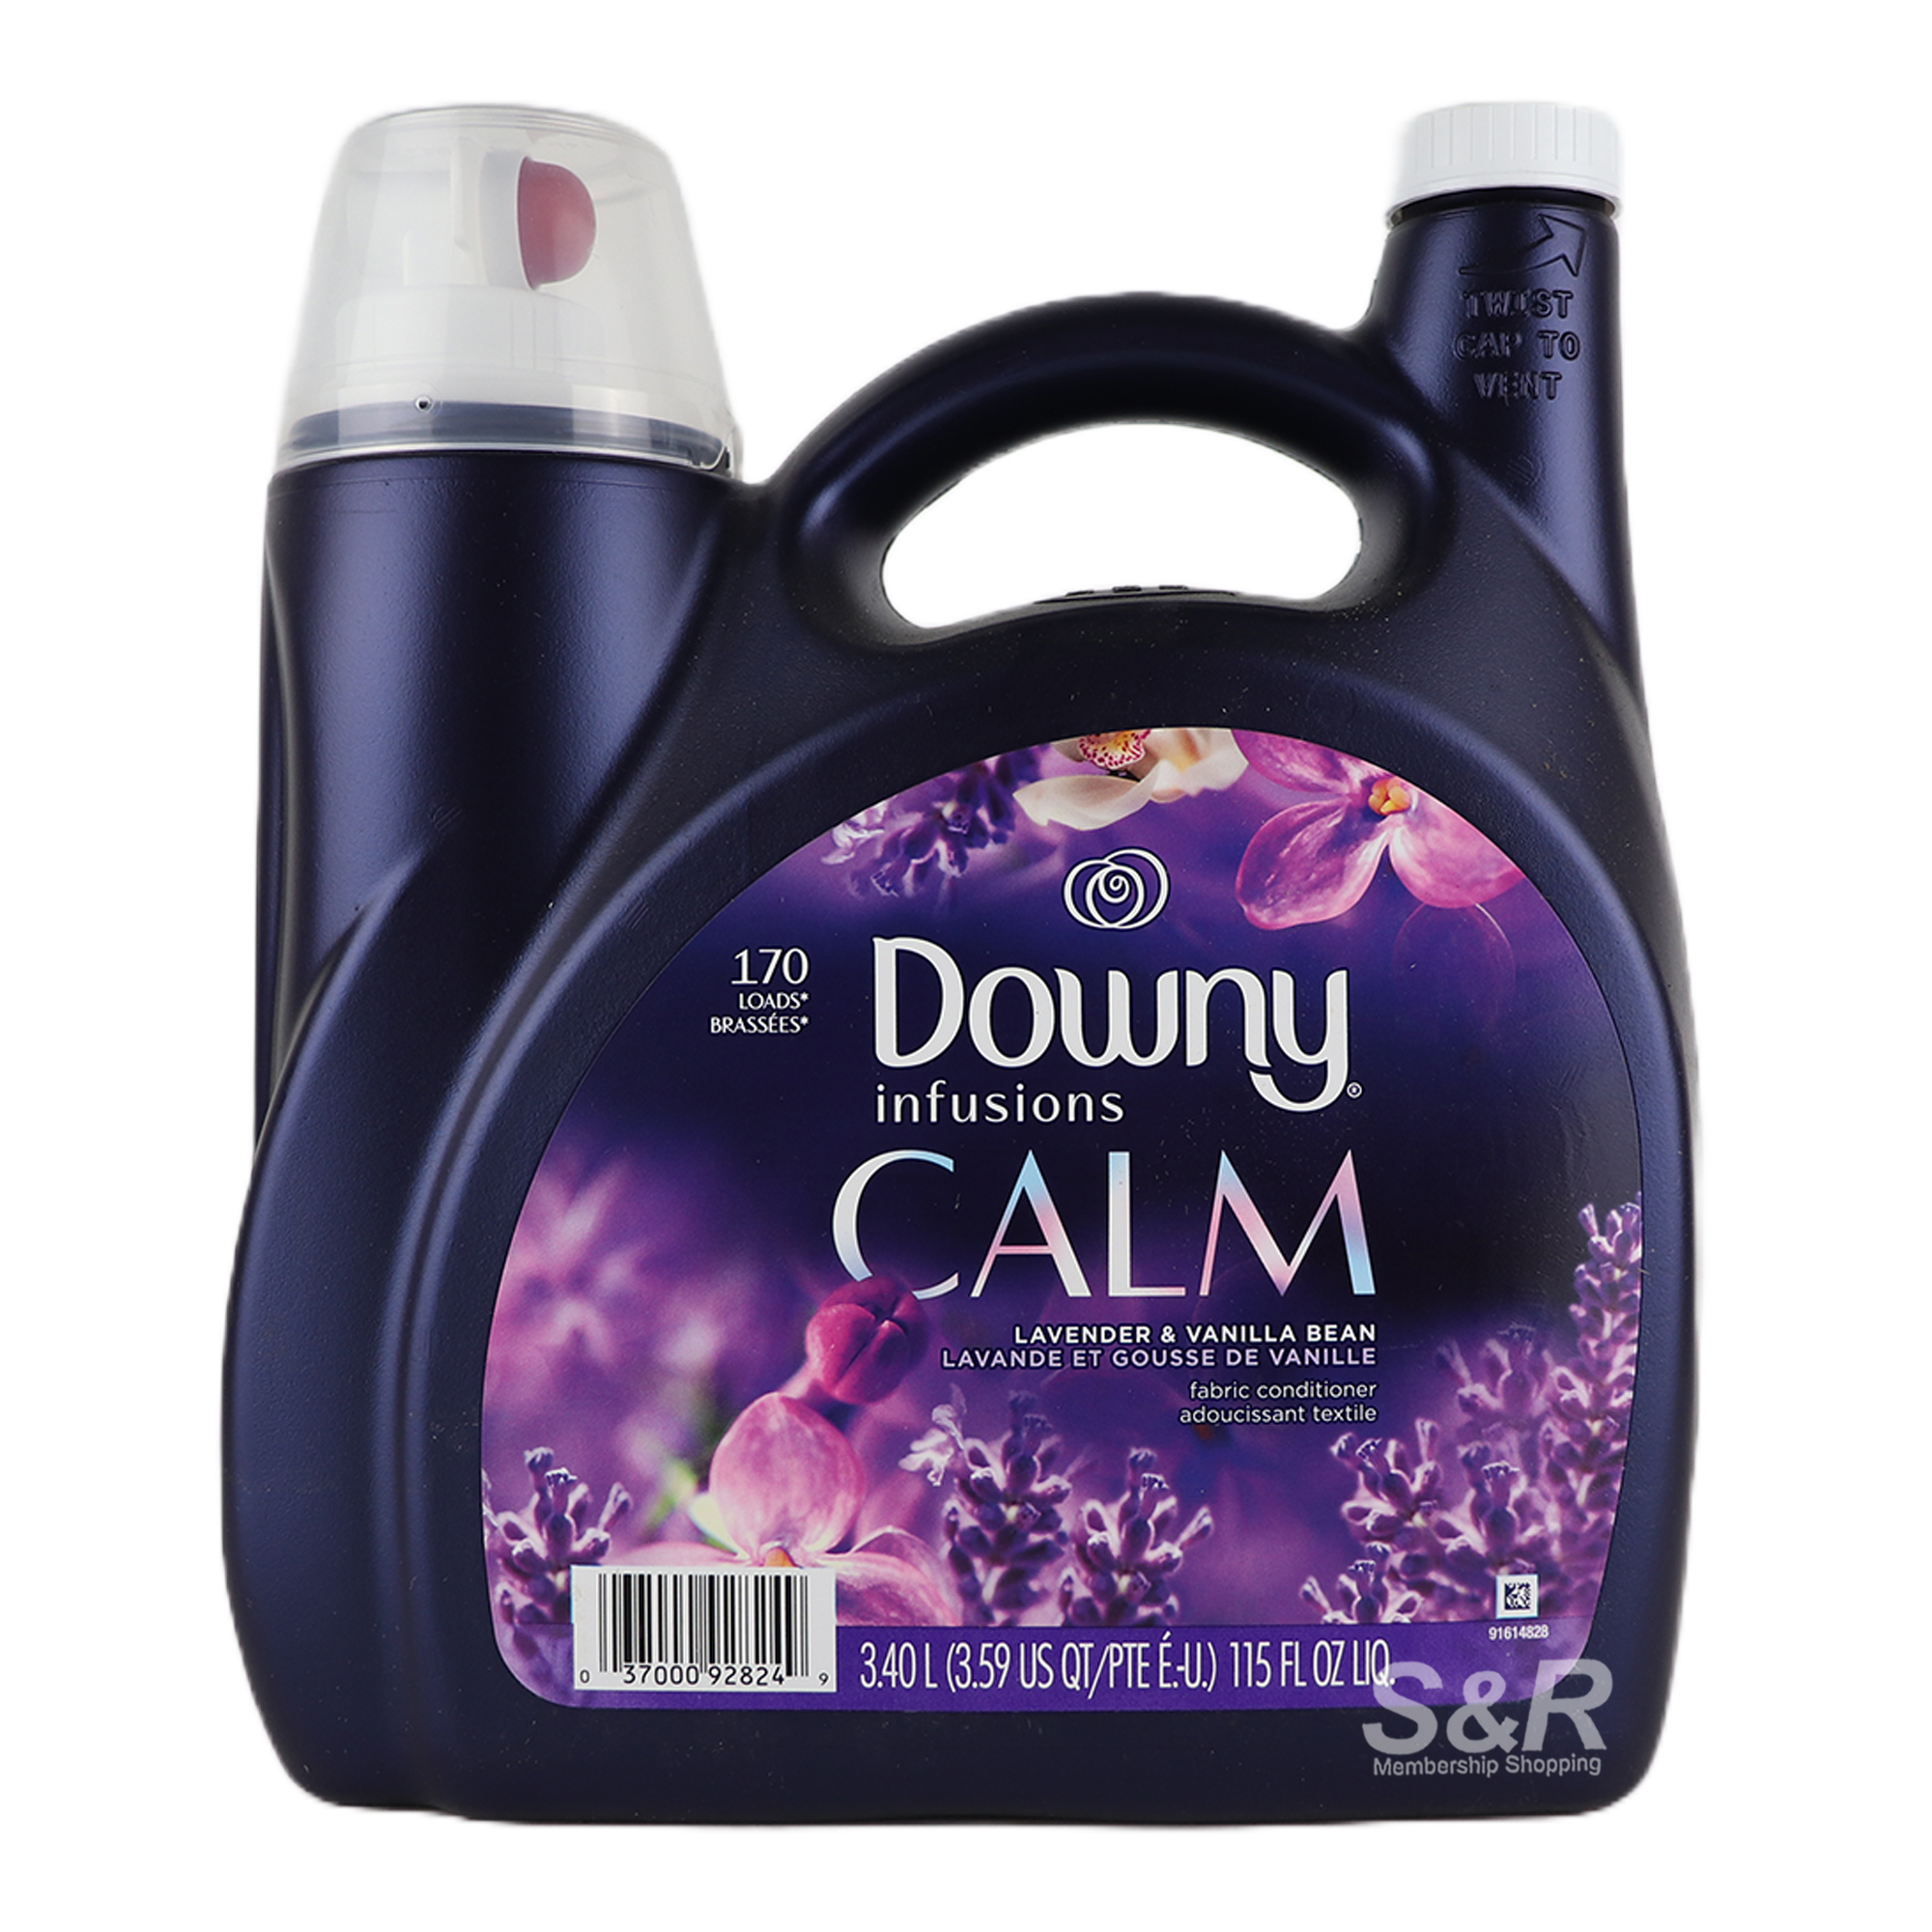 Downy Infusions Fabric Conditioner Calm Lavender and Vanilla Bean 3.40L